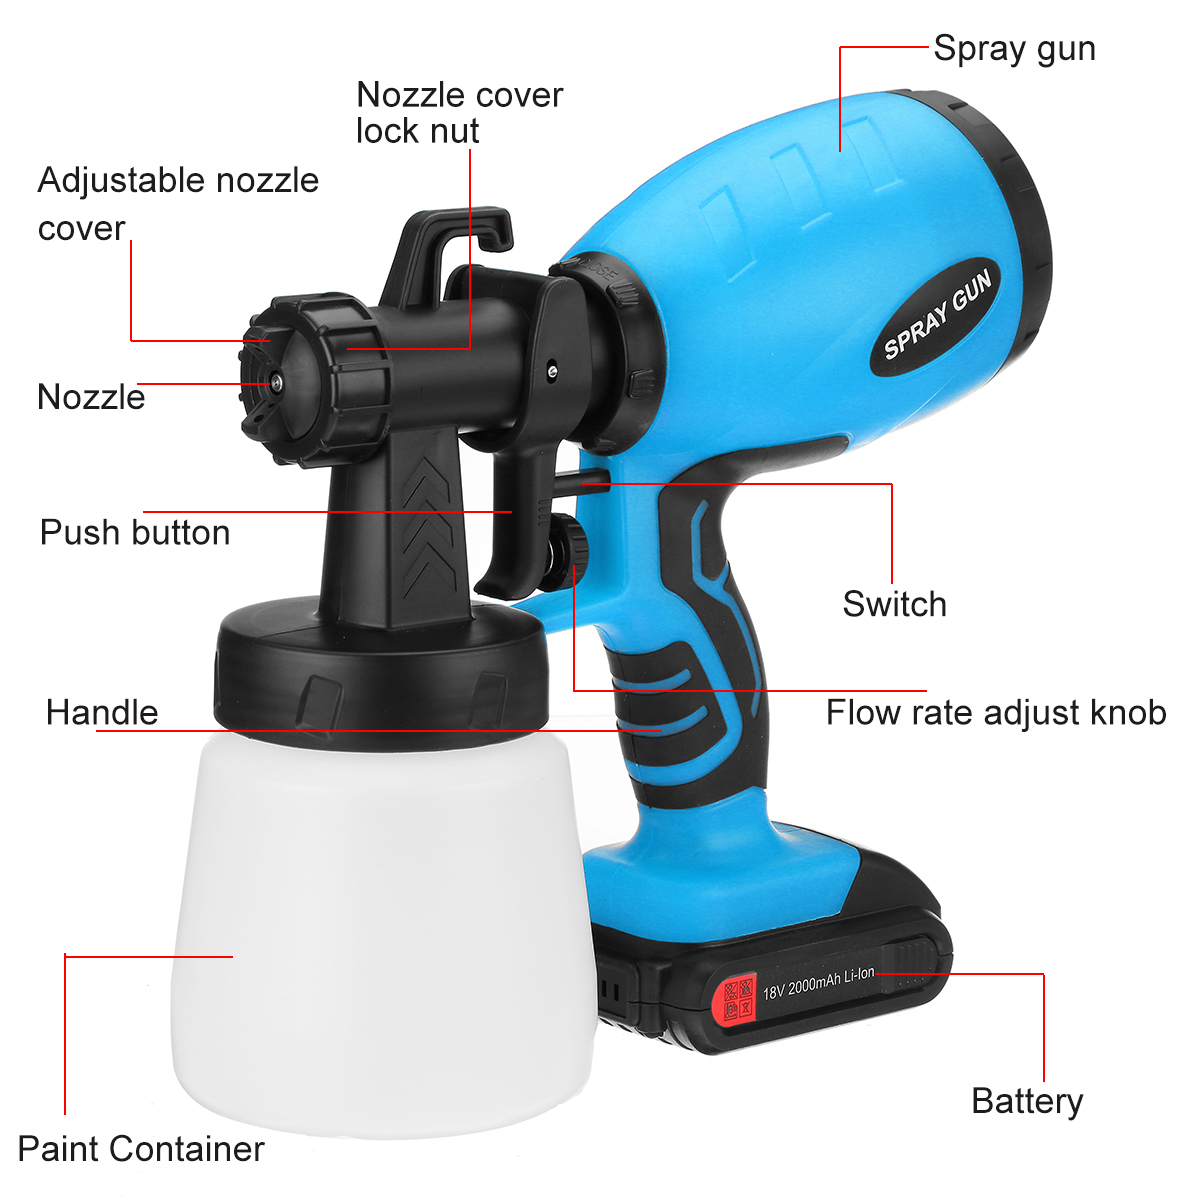 2000mAh-Portable-Electric-Paint-Sprayer-Wireless-Handheld-Spray-Guns-Home-Indoor-Fence-Painting-Tool-1851241-10